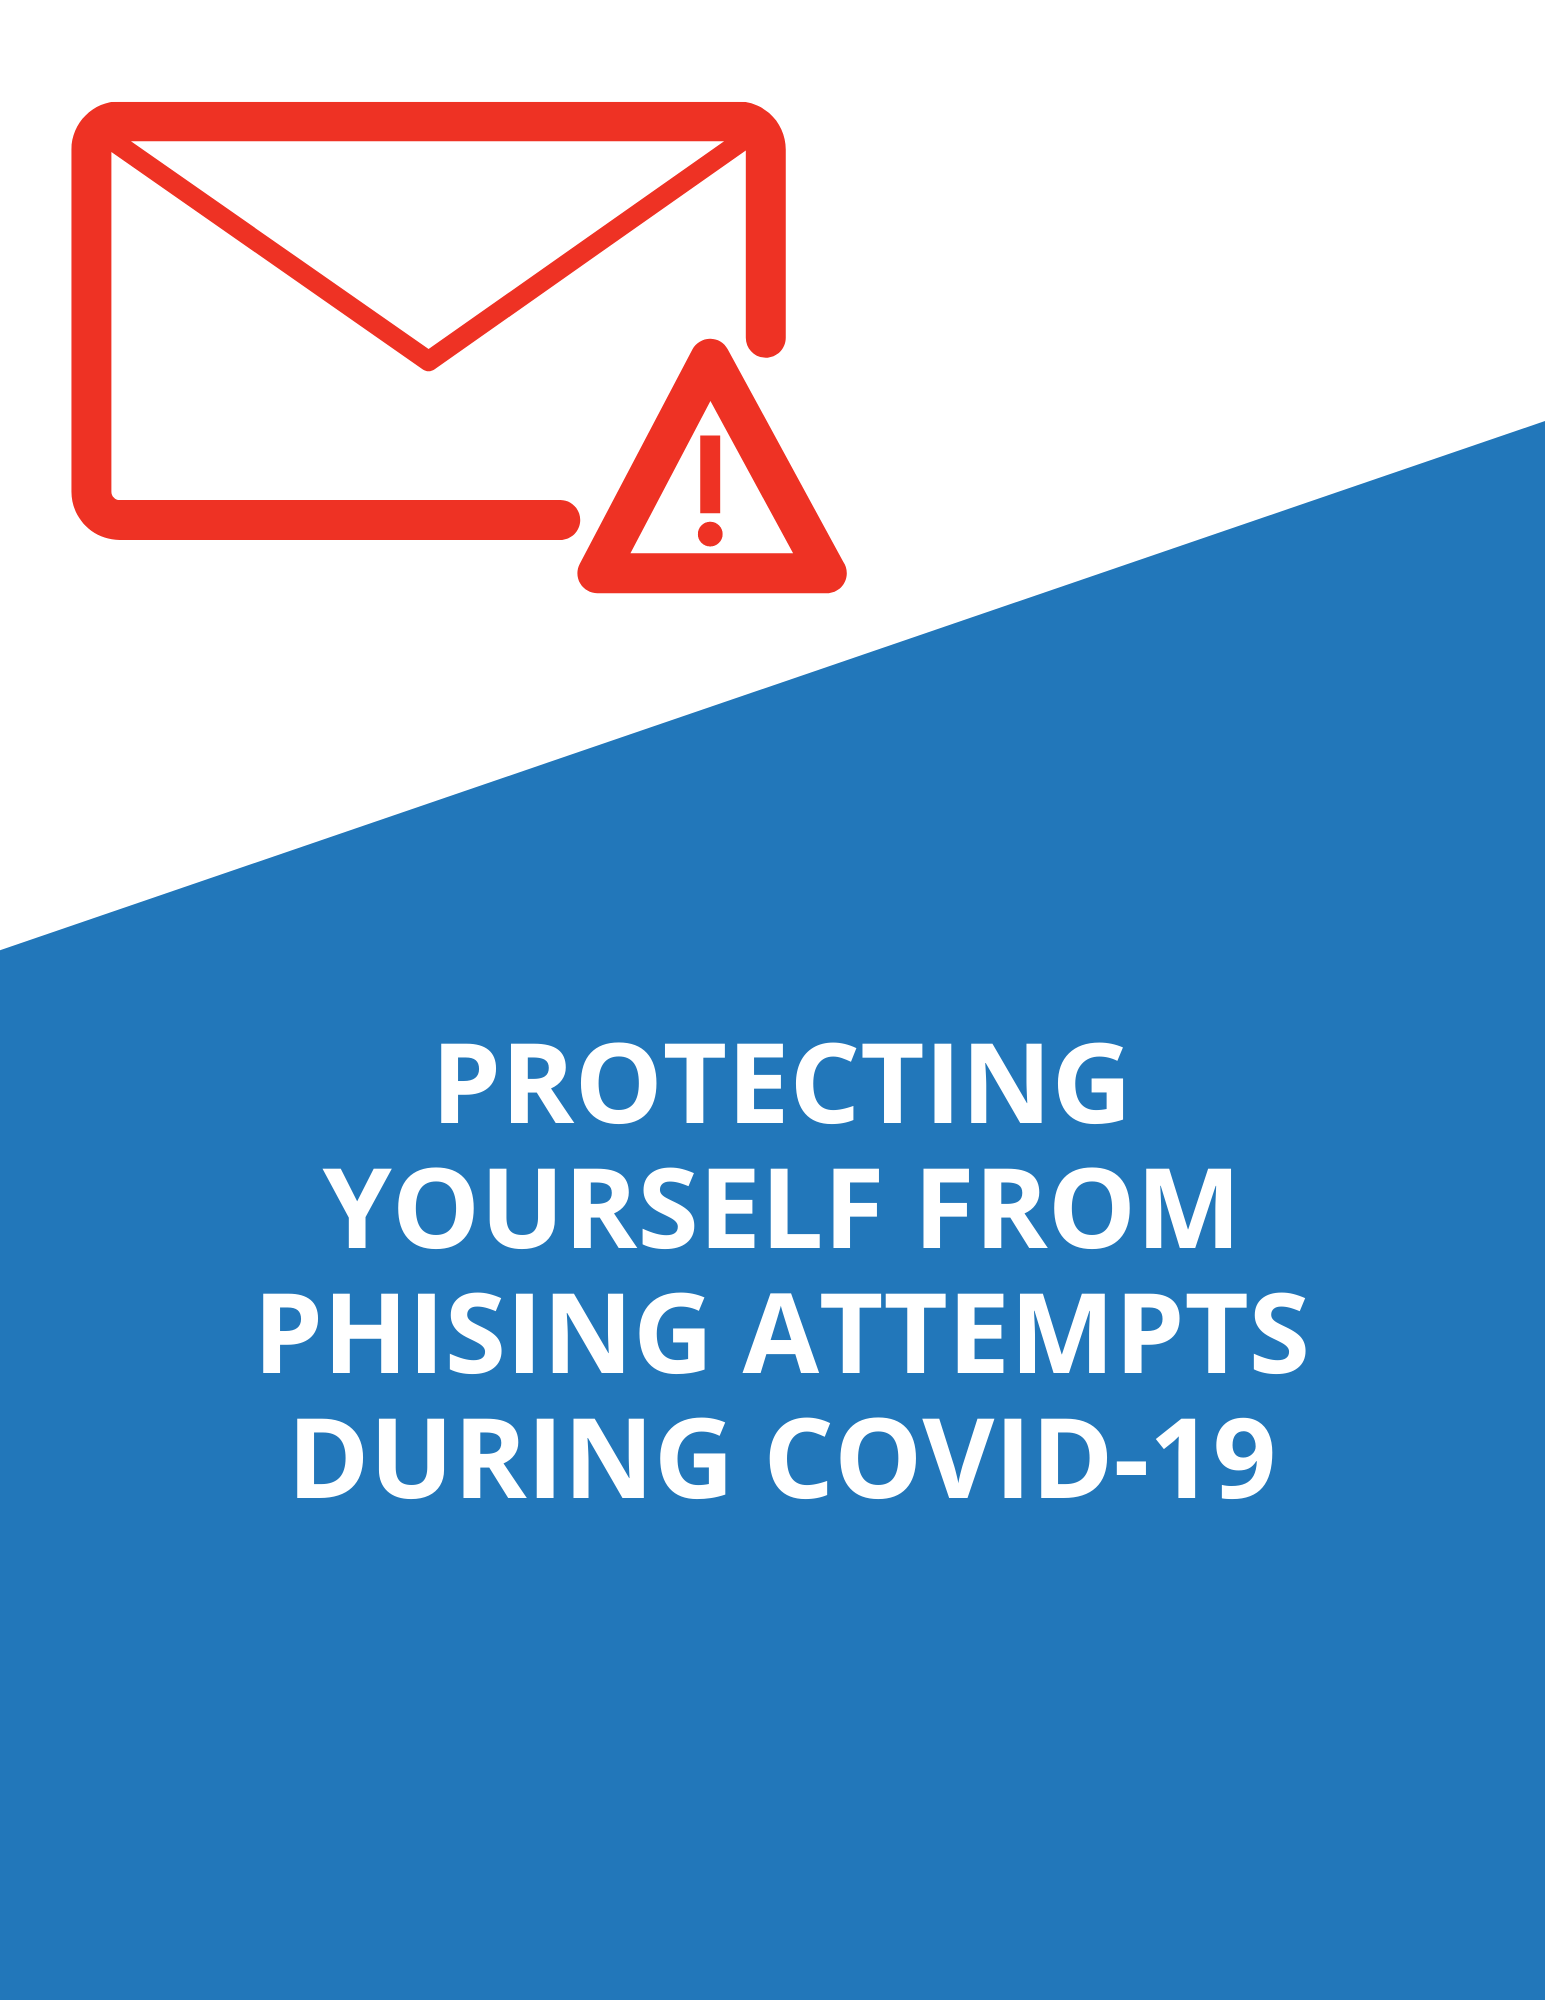 Protecting Yourself from Phising Attempts During COVID-19